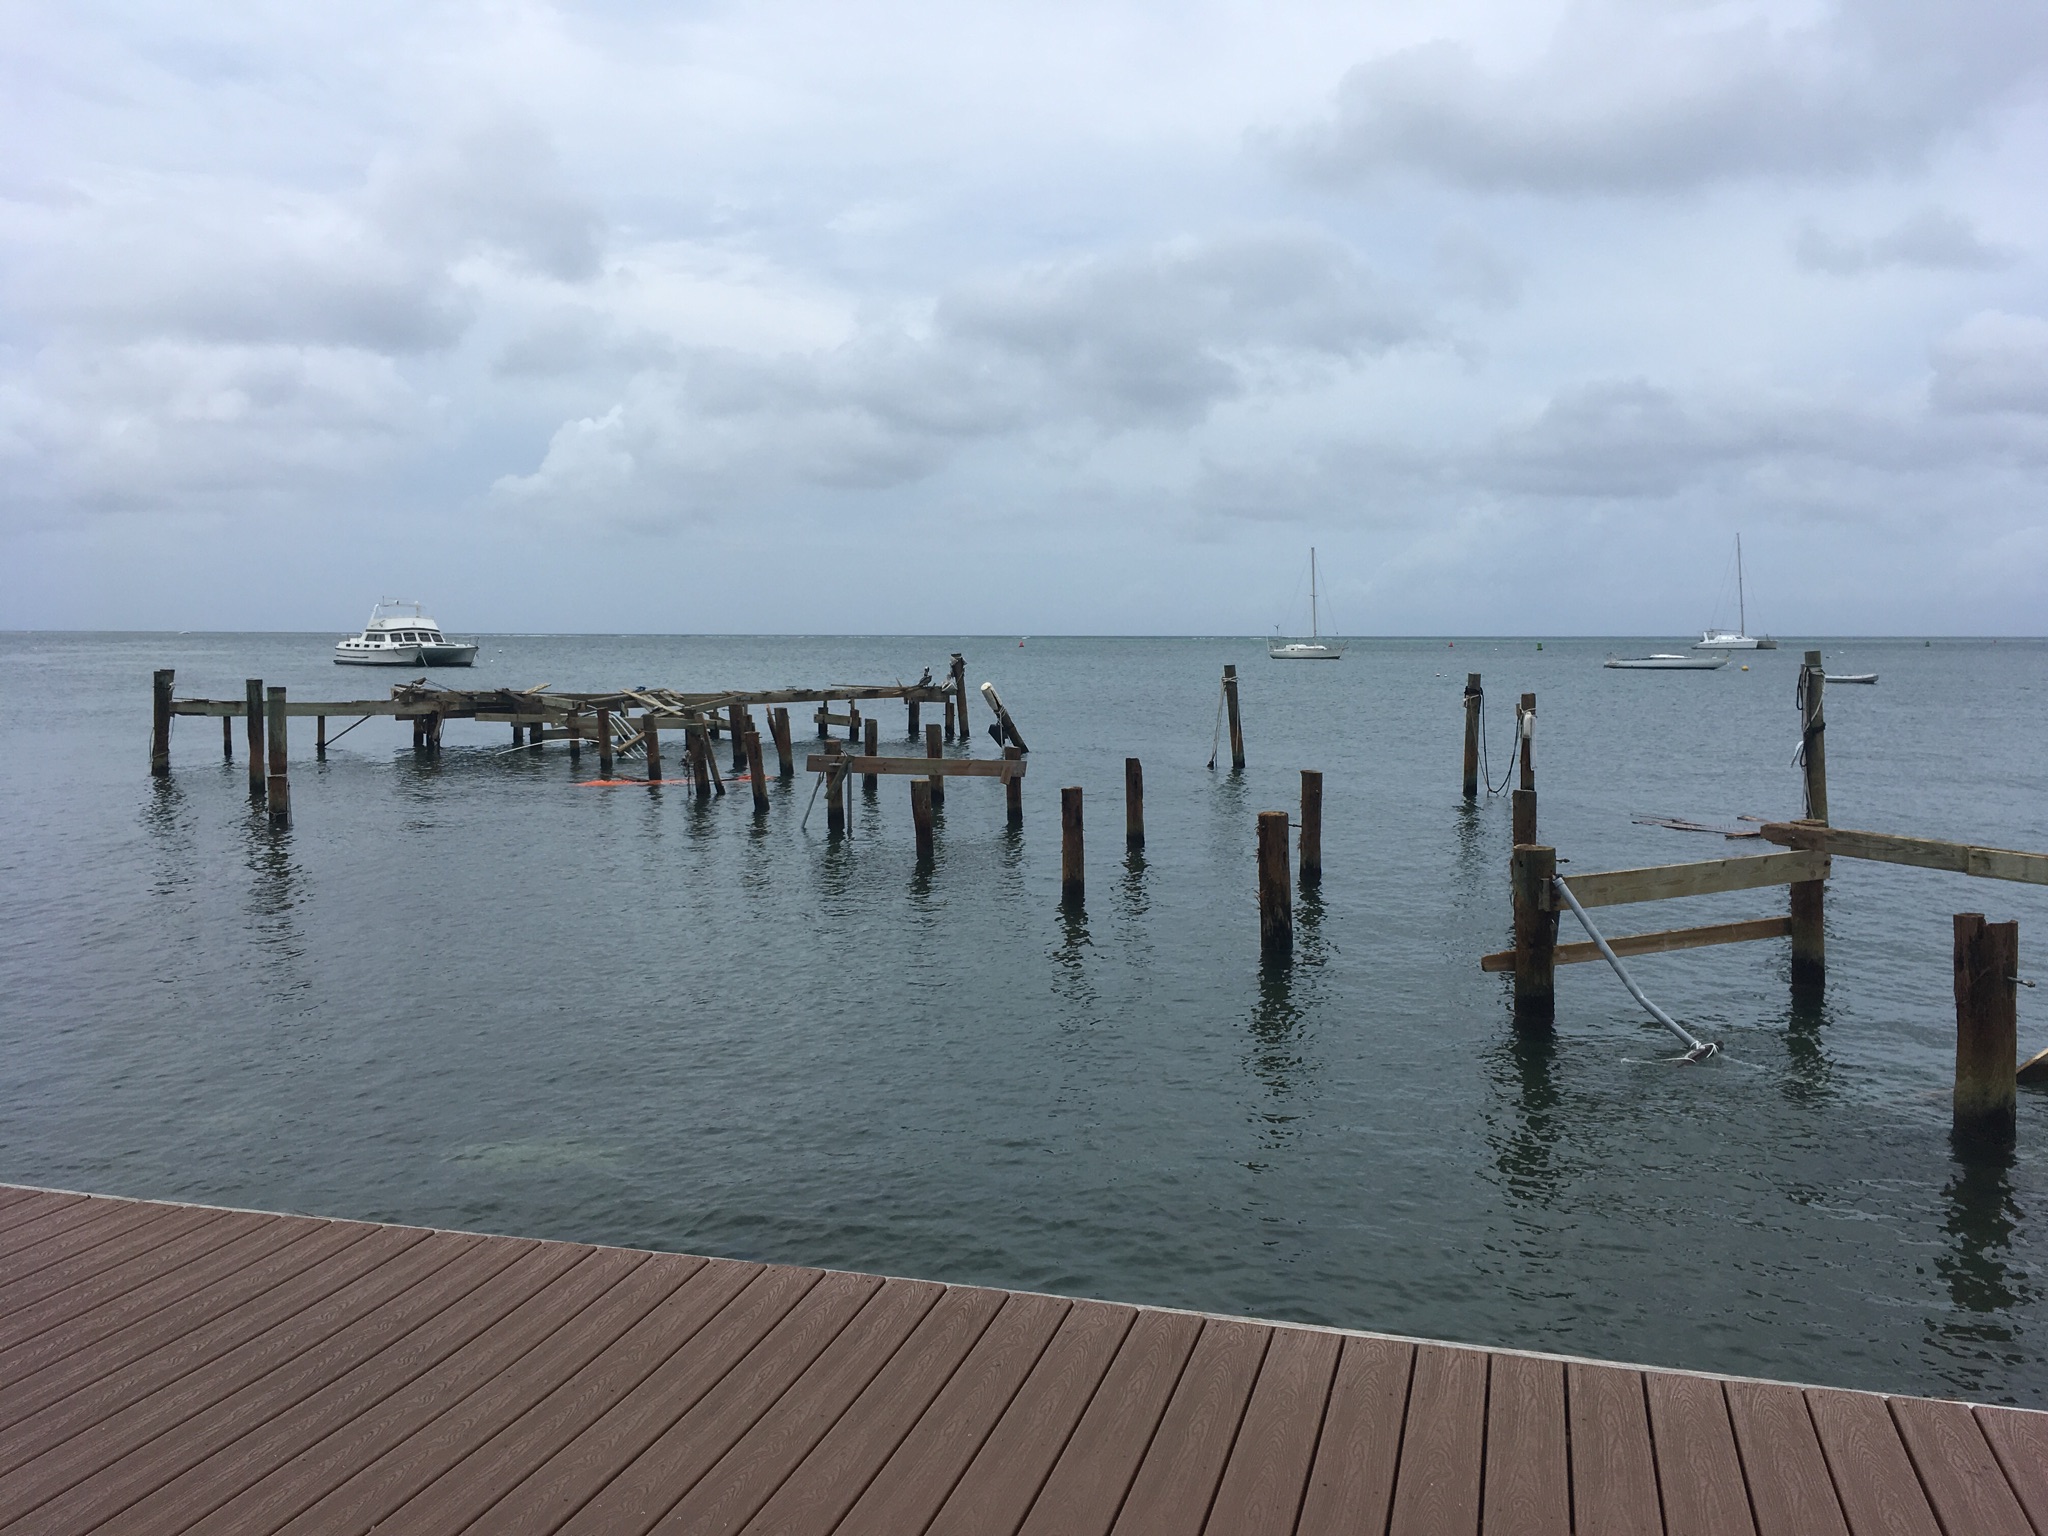 A sailboat dock is gone at Christiansted harbor, but the boardwalk is mostly intact. (Marina Leonard photo)